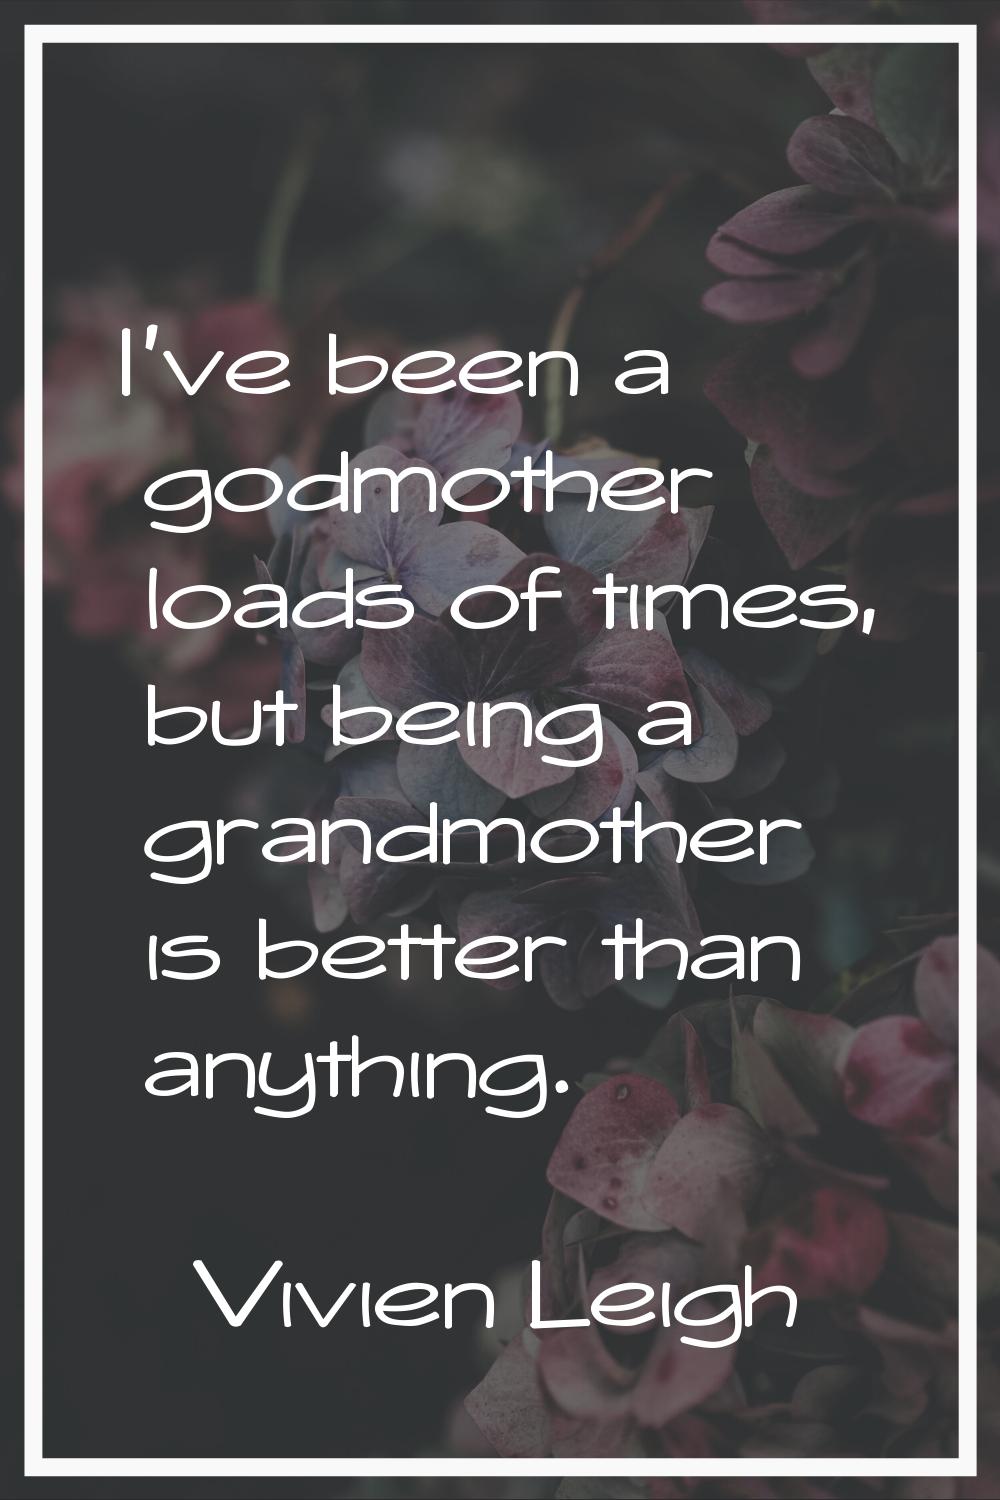 I've been a godmother loads of times, but being a grandmother is better than anything.